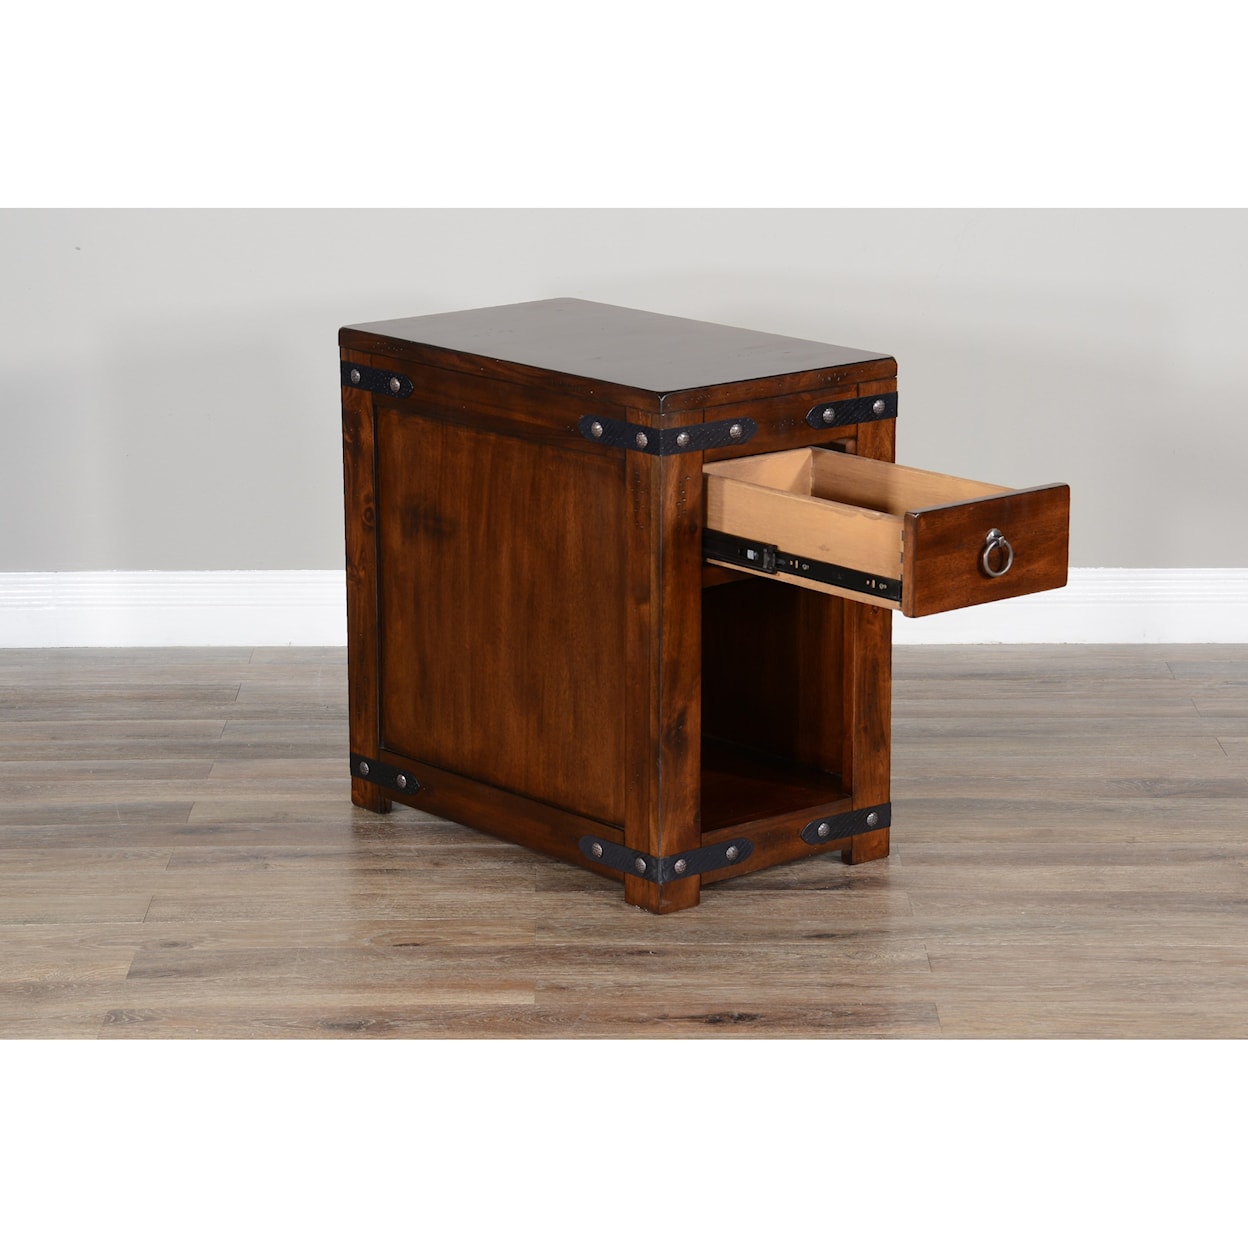 Sunny Designs 12136 Chair Side Table